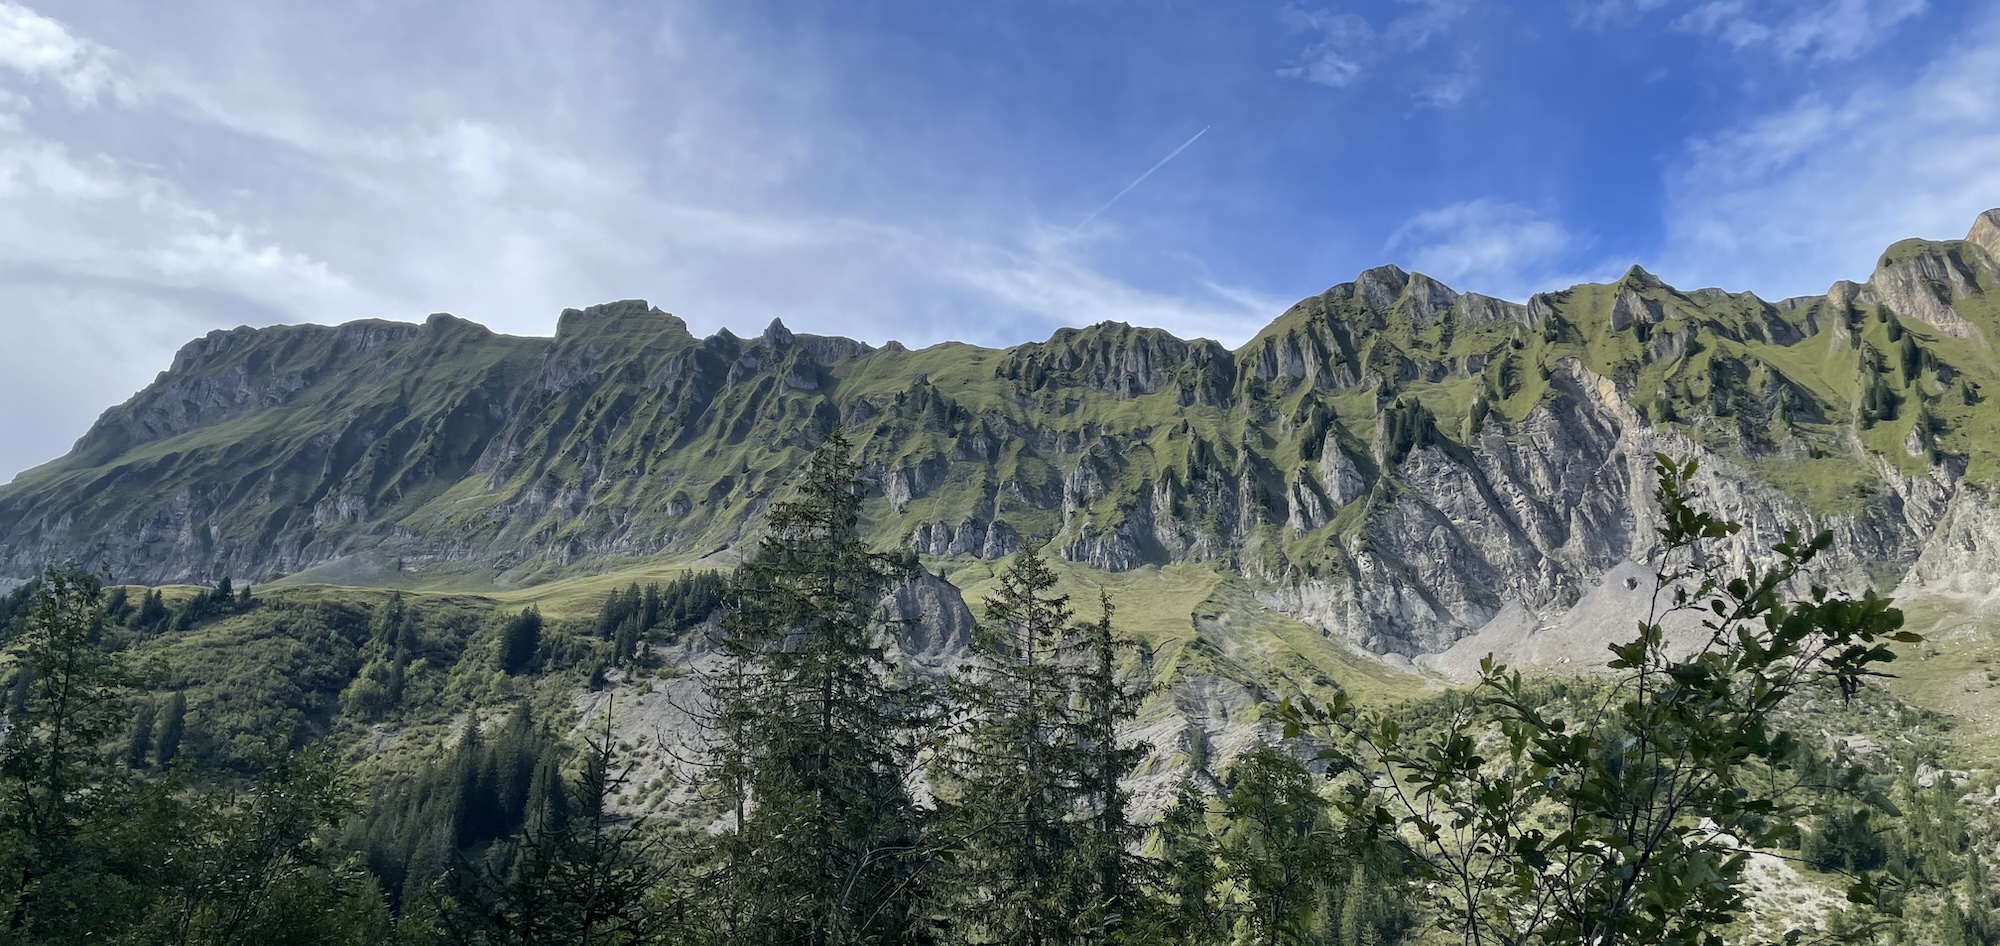 The view from the brutal Pragelpass